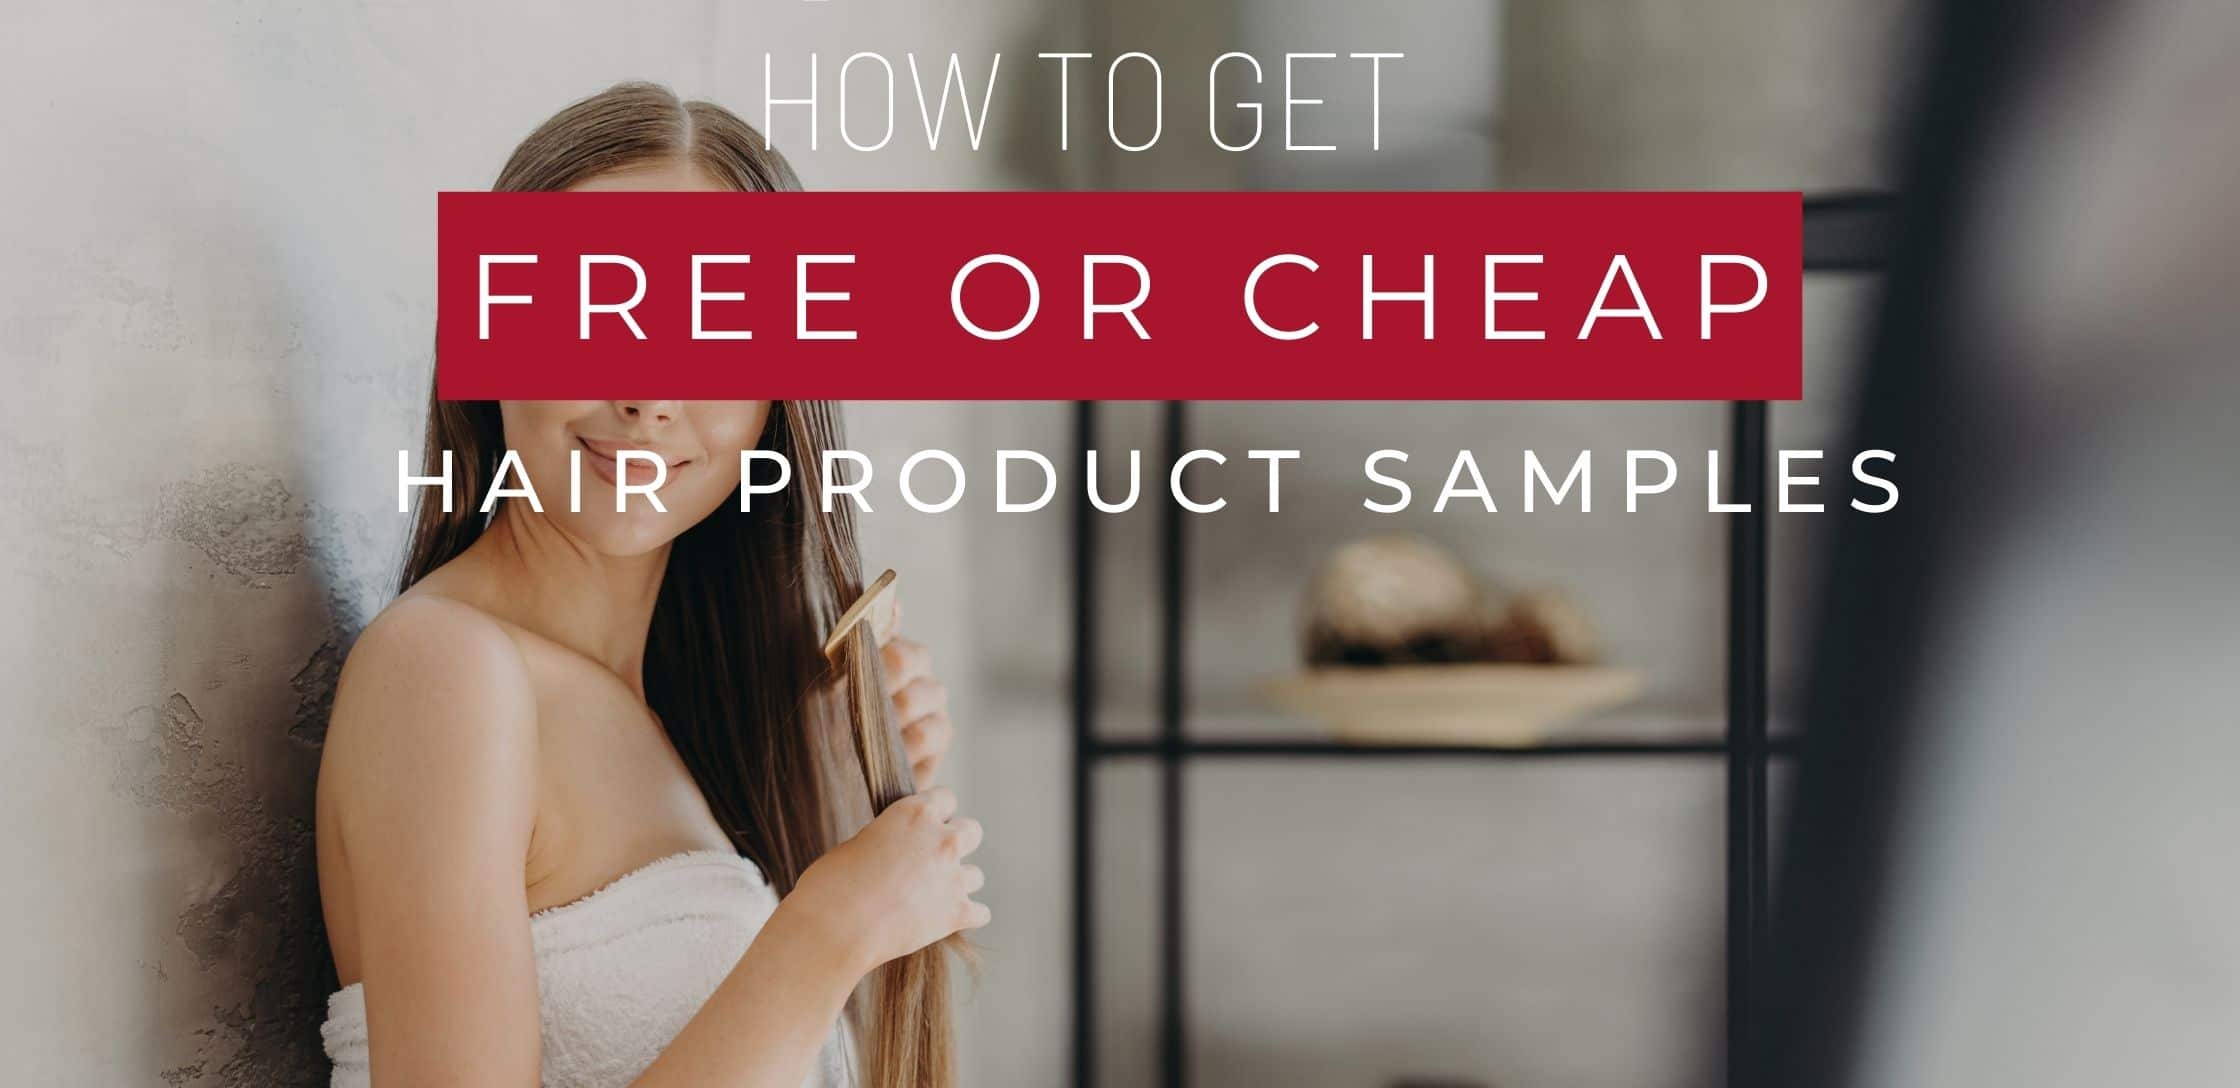 Free hair product samples